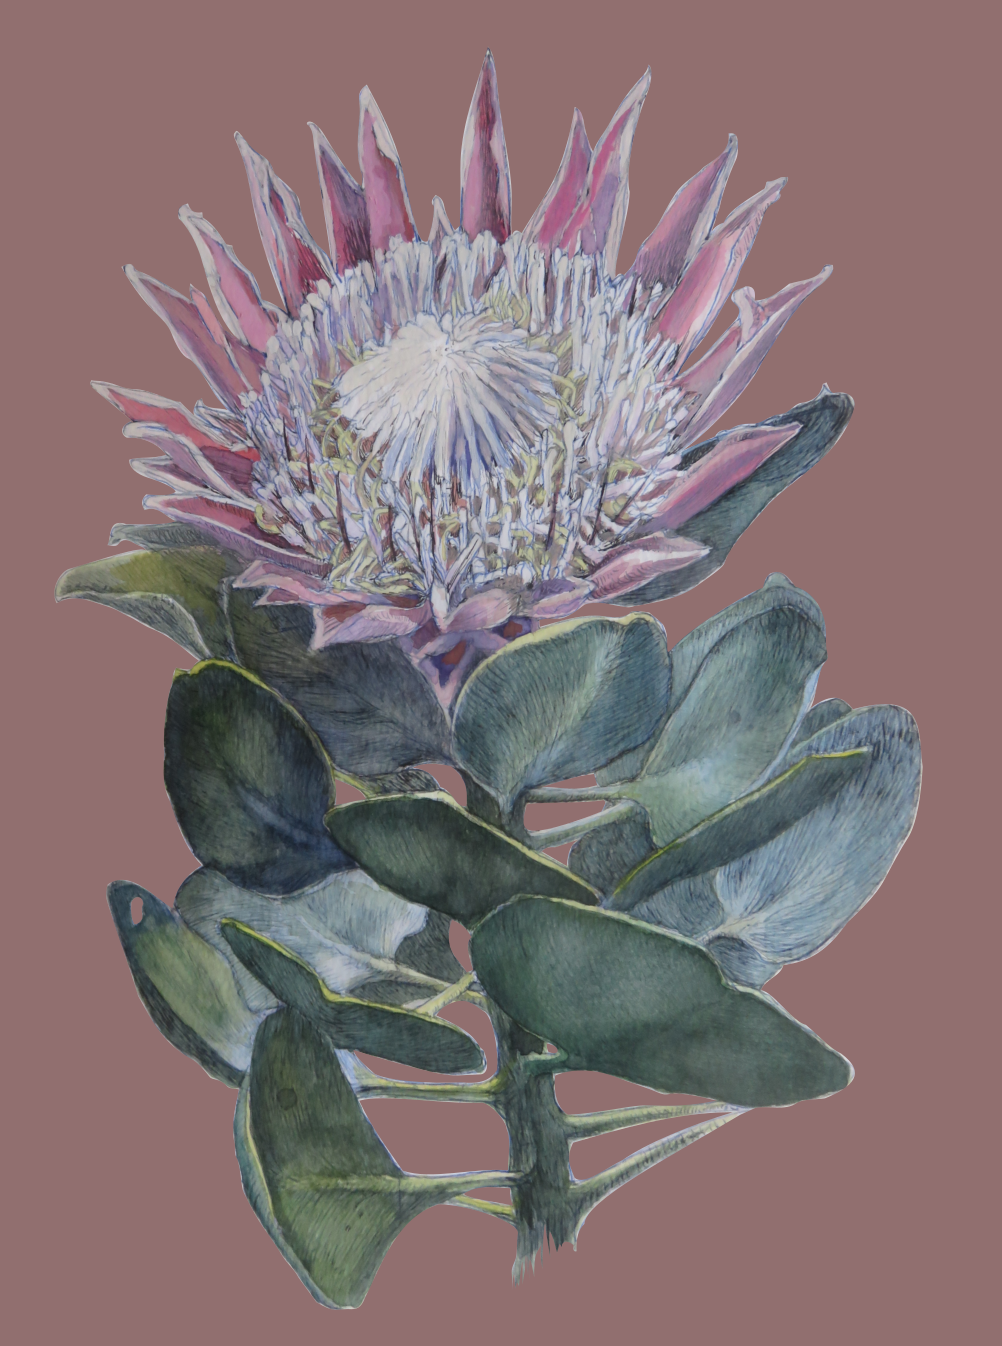 Protea cynaroides painting also available on decor items, accessories and clothing.